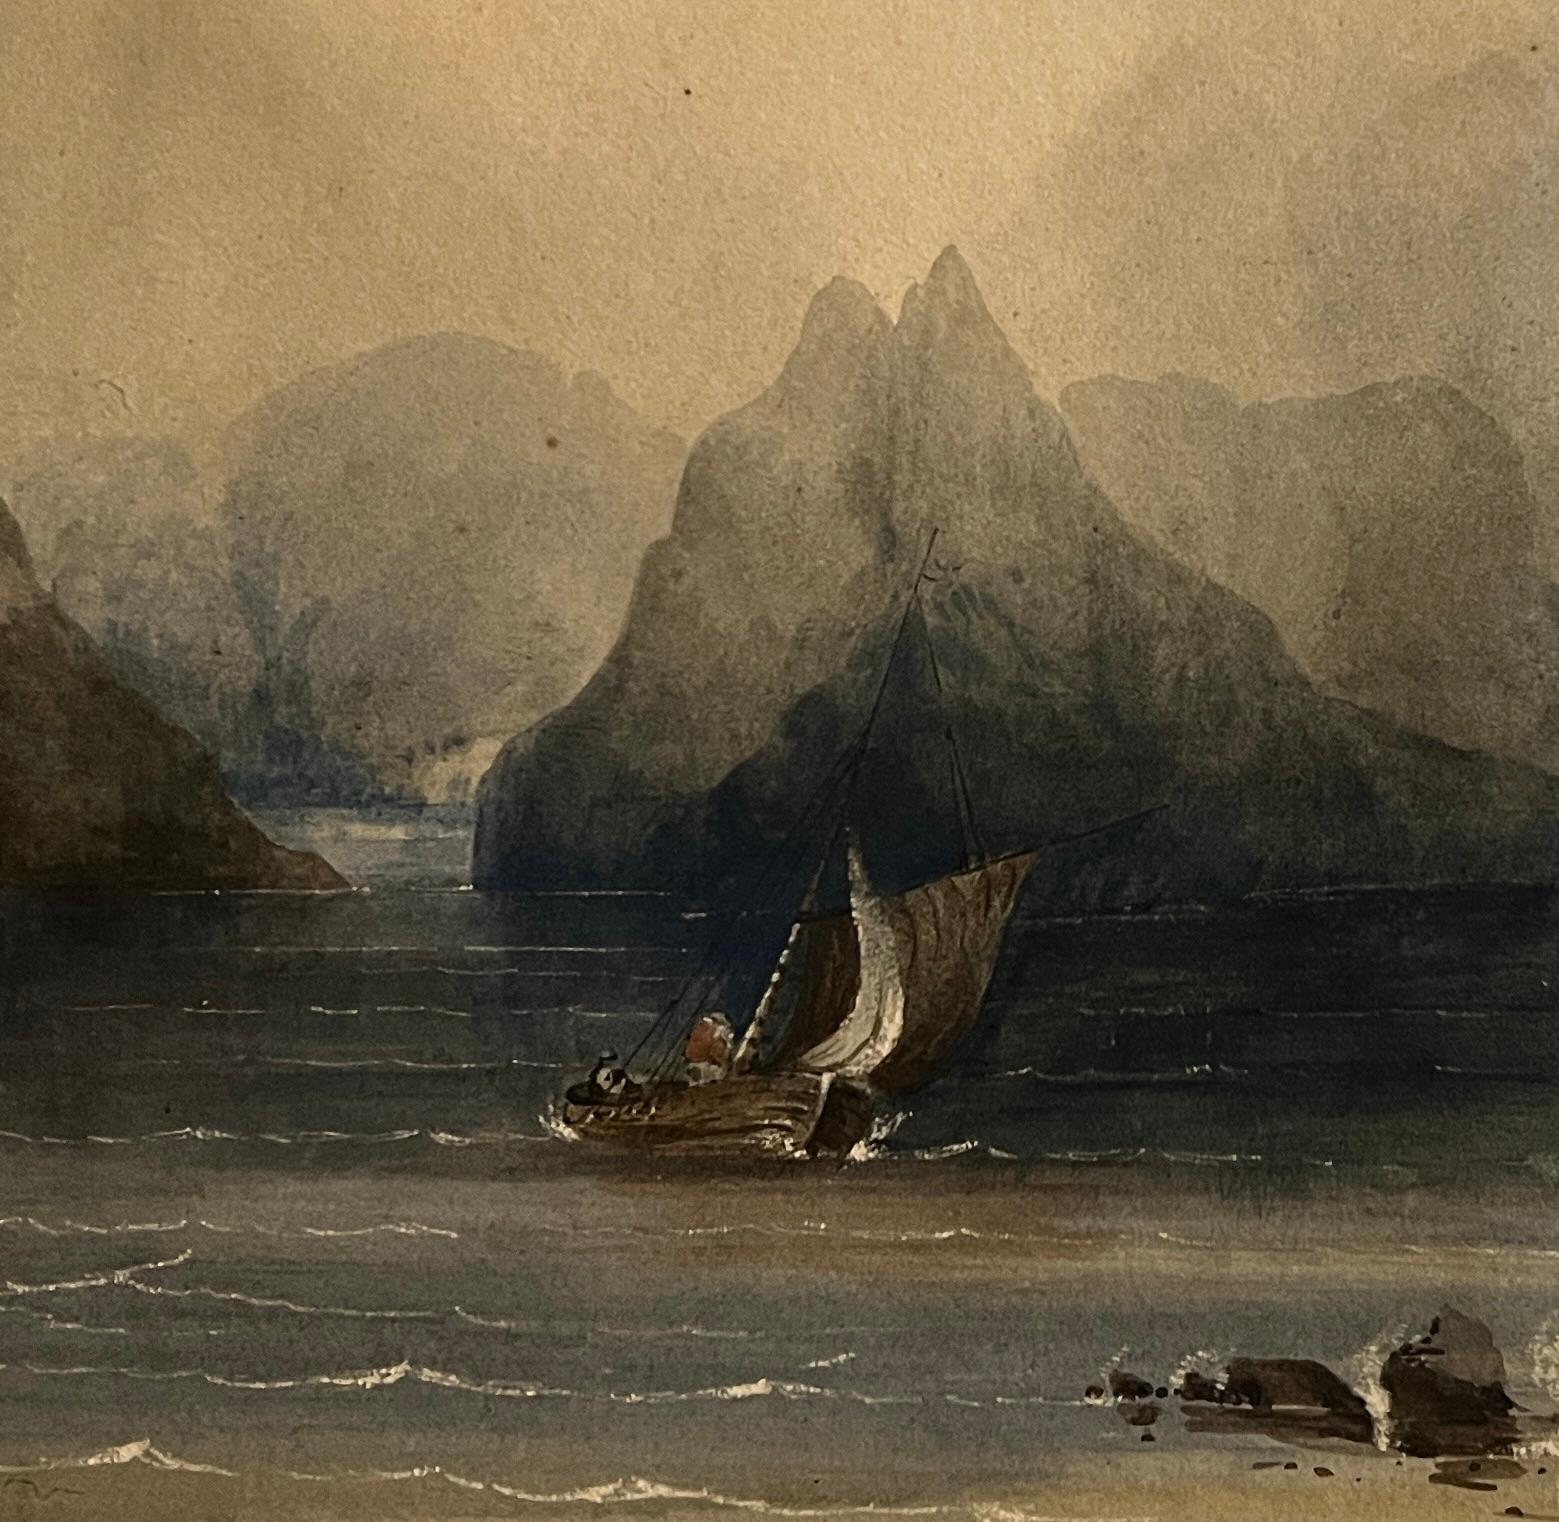 Charles Darwin in the Beagle’s Tender, Coastal Patagonia, Argentina 19th cent wc - Art by Conrad Martens